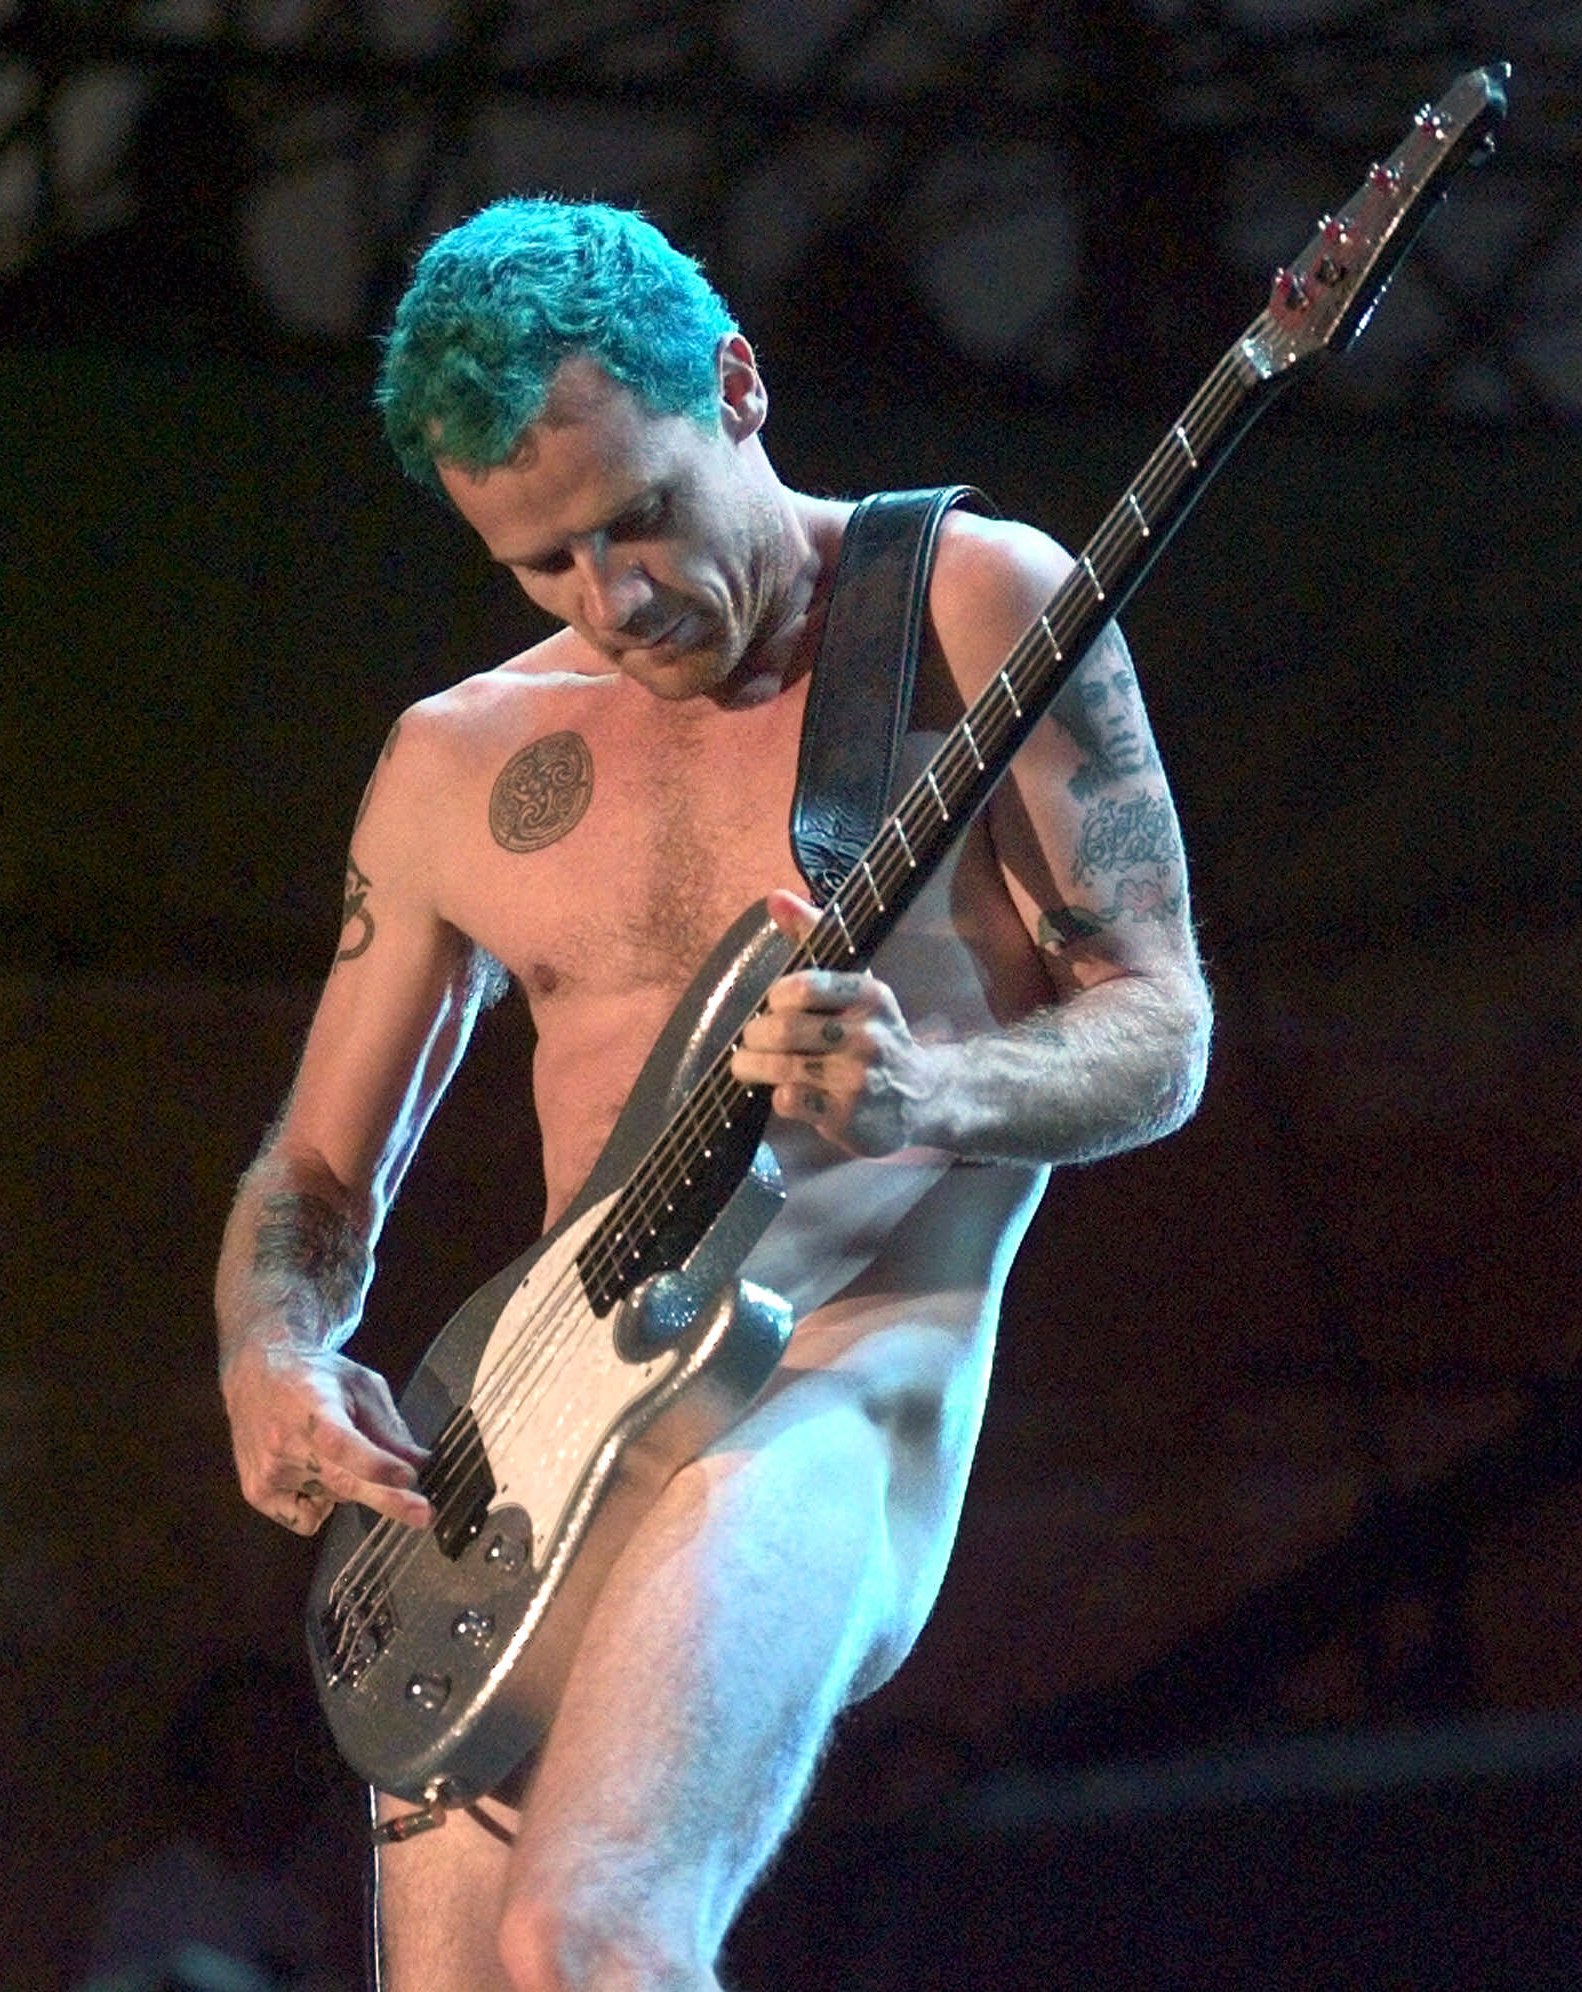 The "Red Hot Chili Peppers" bassist Flea performs on the final ev...